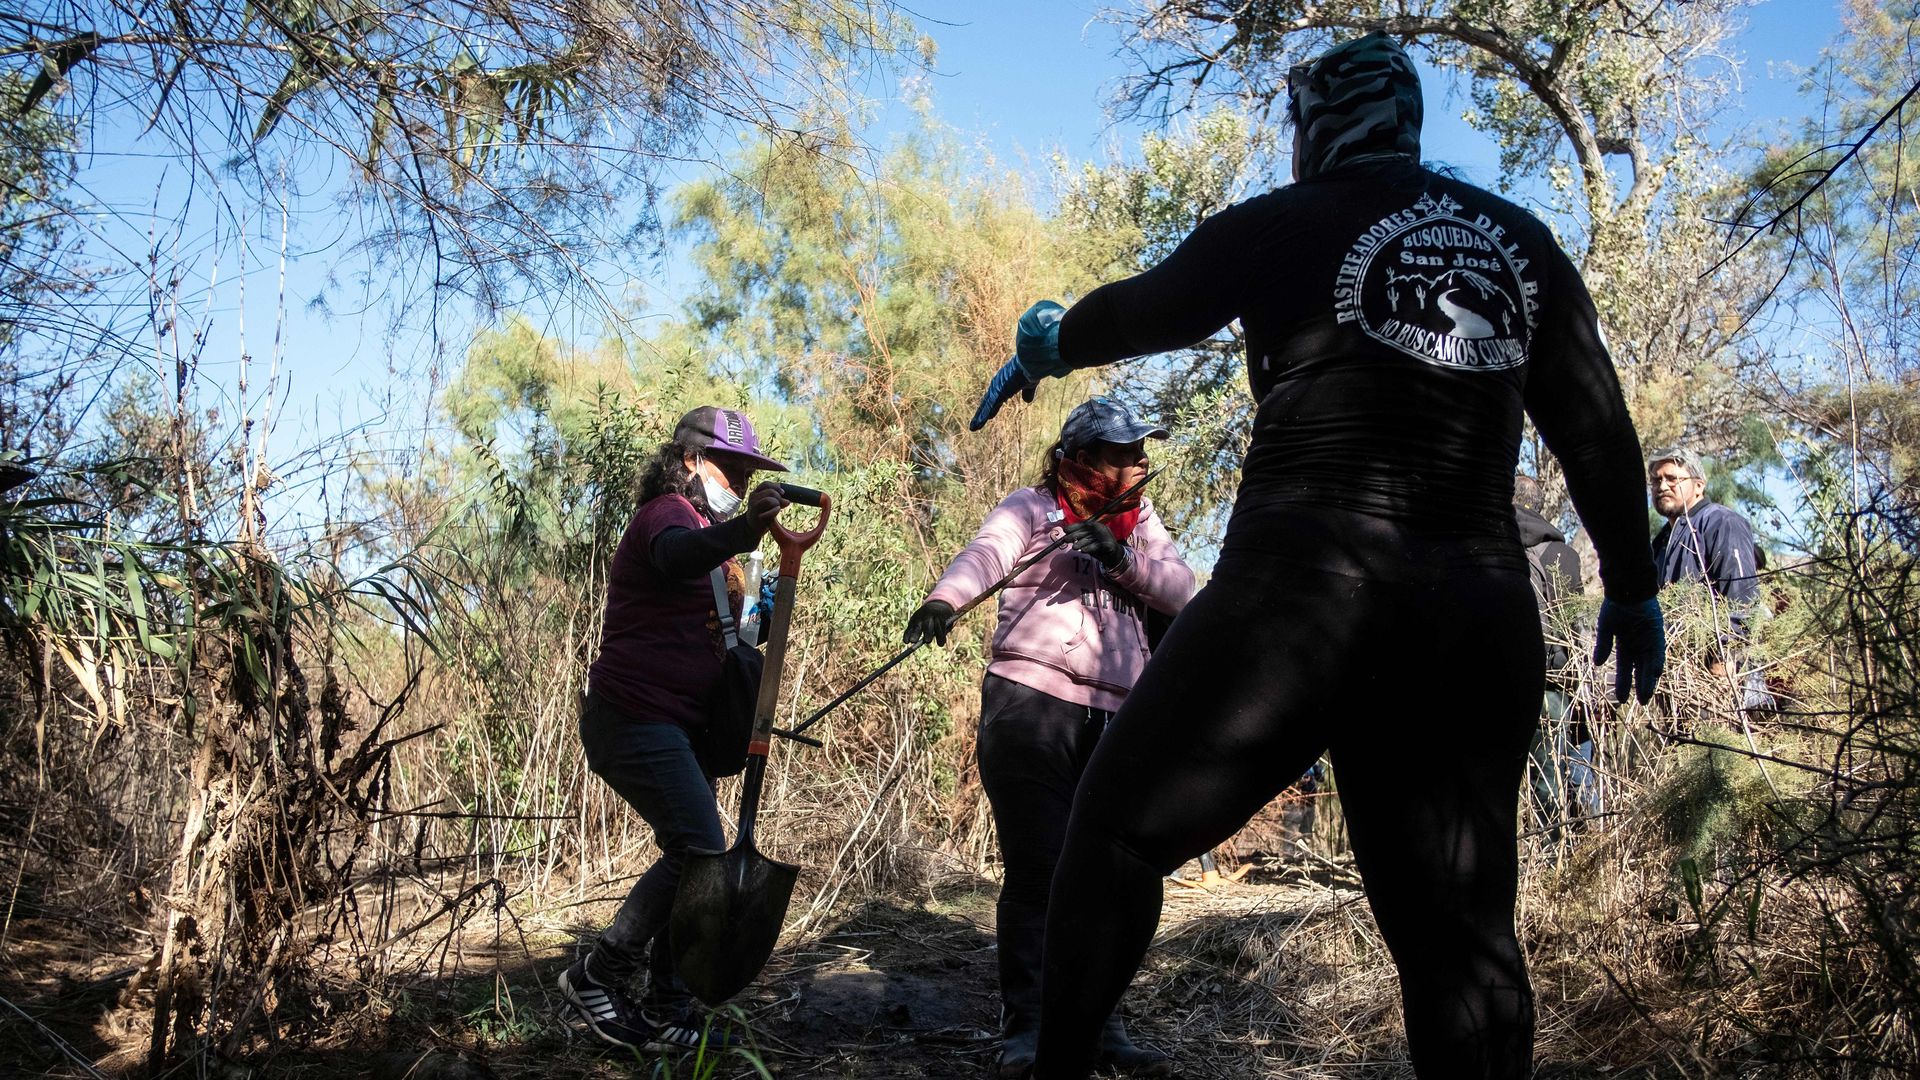 Women dig in a field near Tijuana in search of remains of forcibly disappeared people, November 2019. Photo: Guillermo Arias/AFP  via Getty Images